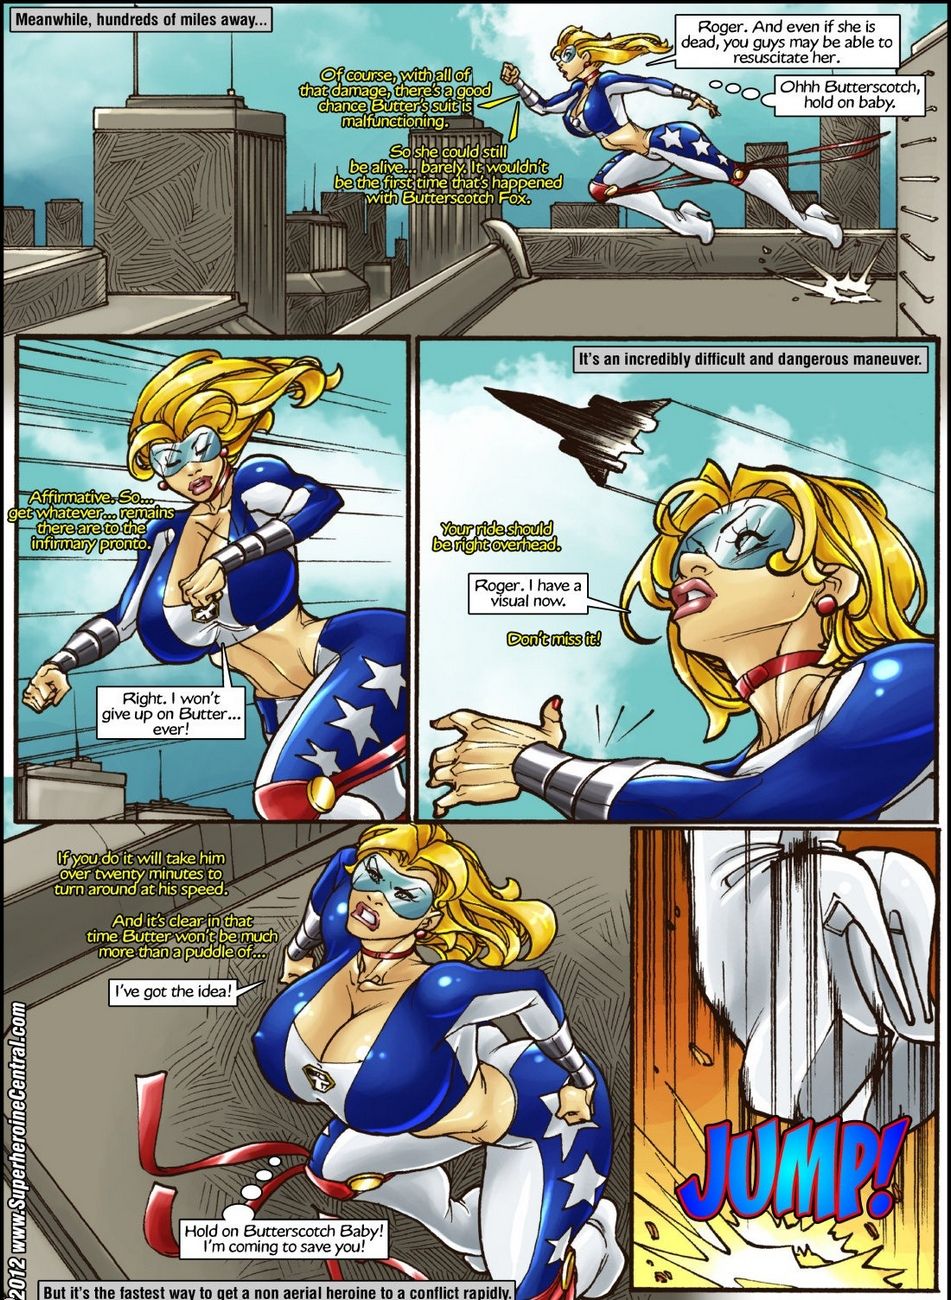 American Angel 1 - Smart Weapon page 9